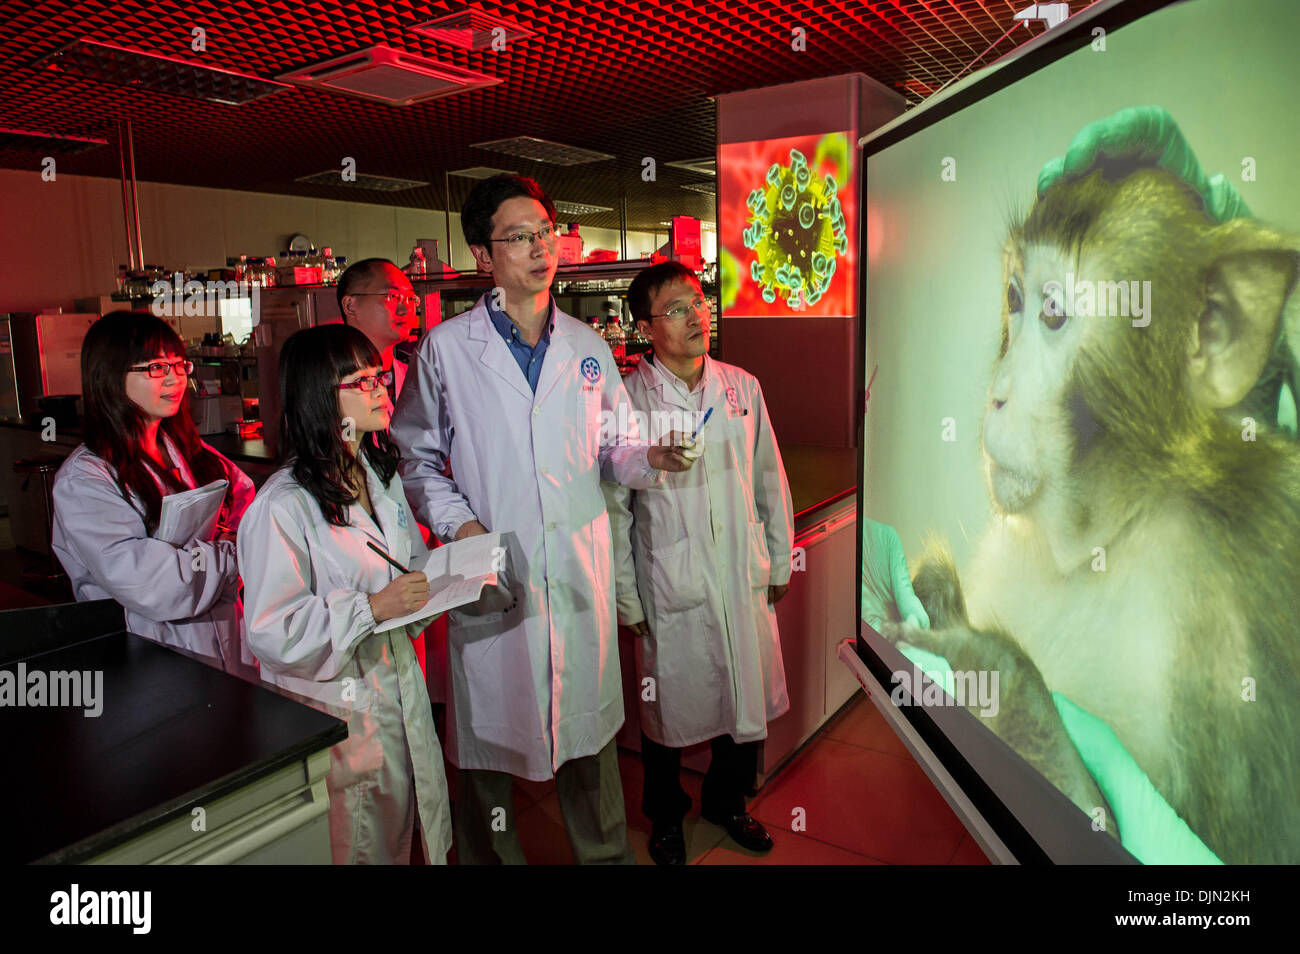 (131129) -- GUANGZHOU, Nov. 29, 2013 (Xinhua) -- Dr. Chen Ling (2nd R) and his team analyze a test result of experimental monkey No. 031137 at Guangzhou Institute of Biomedicine and Health of Chinese Academy of Sciences in Guangzhou, capital of south China's Guangdong Province, Nov. 18. 2013. A collaborative team co-led by the Comprehensive AIDS Research Center of Tsinghua University, the AIDS Institute of the University of Hong Kong Li Ka Shing Faculty of Medicine and the Guangzhou Institute of Biomedicine and Health of Chinese Academy of Sciences has conducted a five-year preclinical study Stock Photo